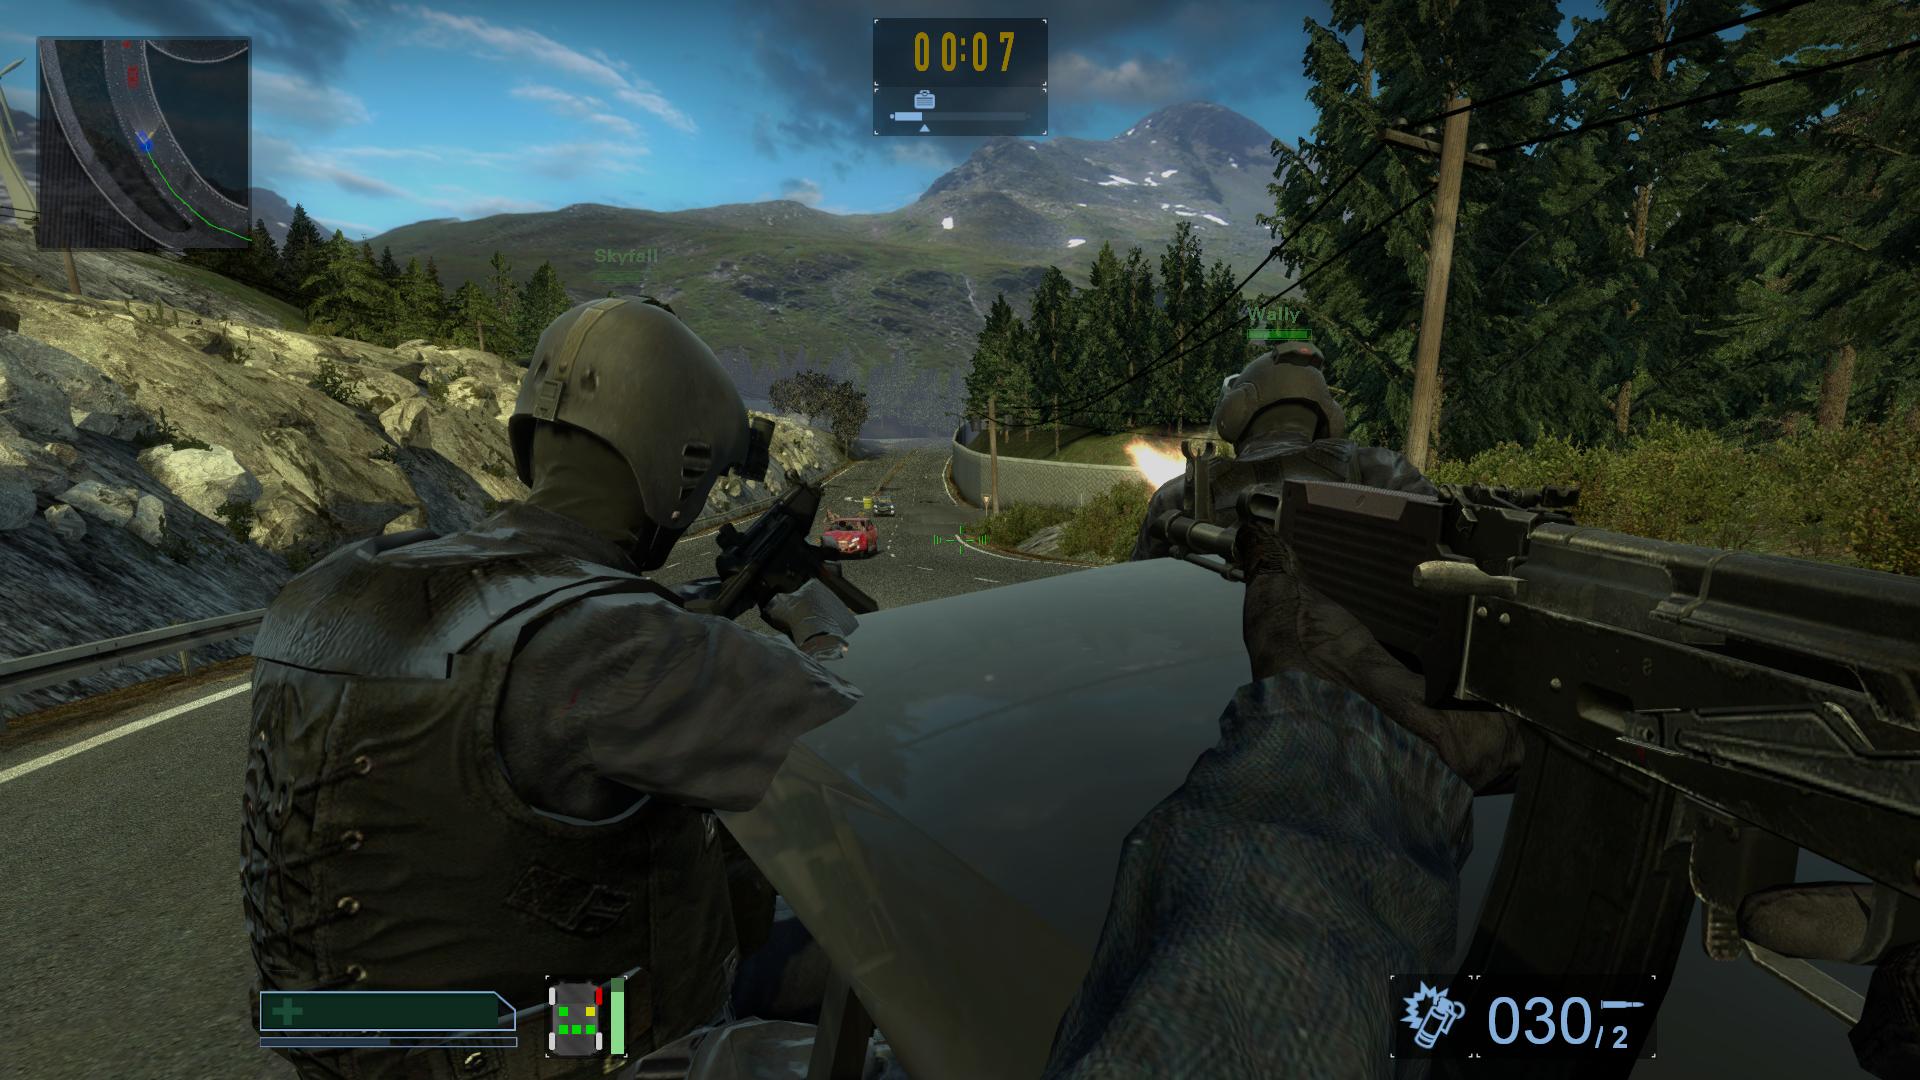 Counter Strike Co-Creator’s Project Now in Open Beta